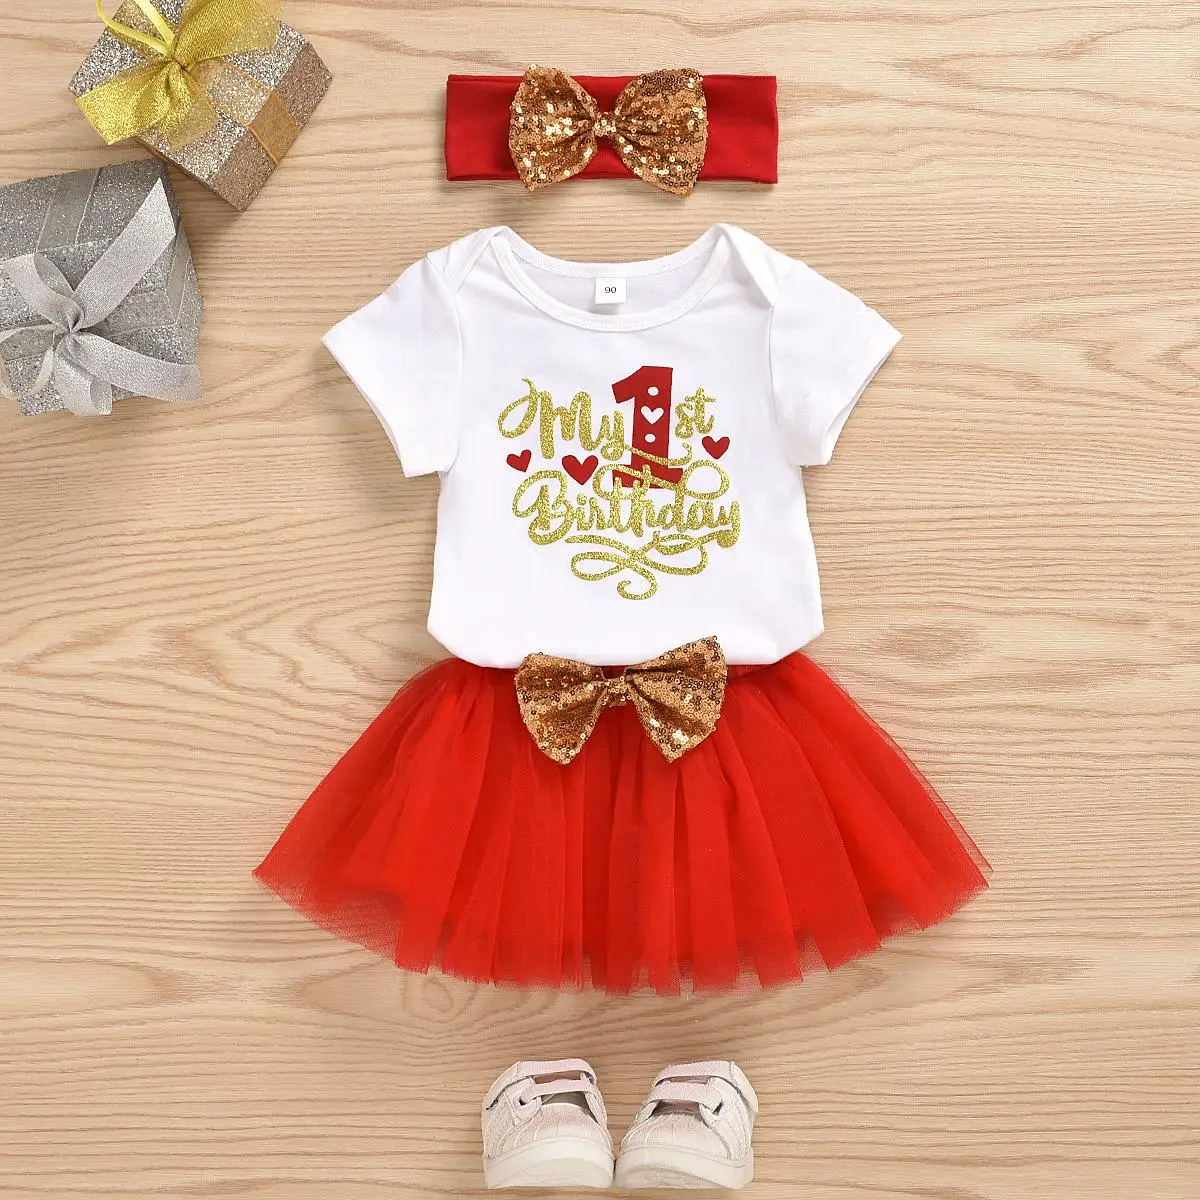 1-3Y Baby Birthday Dress Newborn Infantil Tutu Outfit Baby Girls Cake Smash Outfits Letter Printing And Lace Stitching Clothes